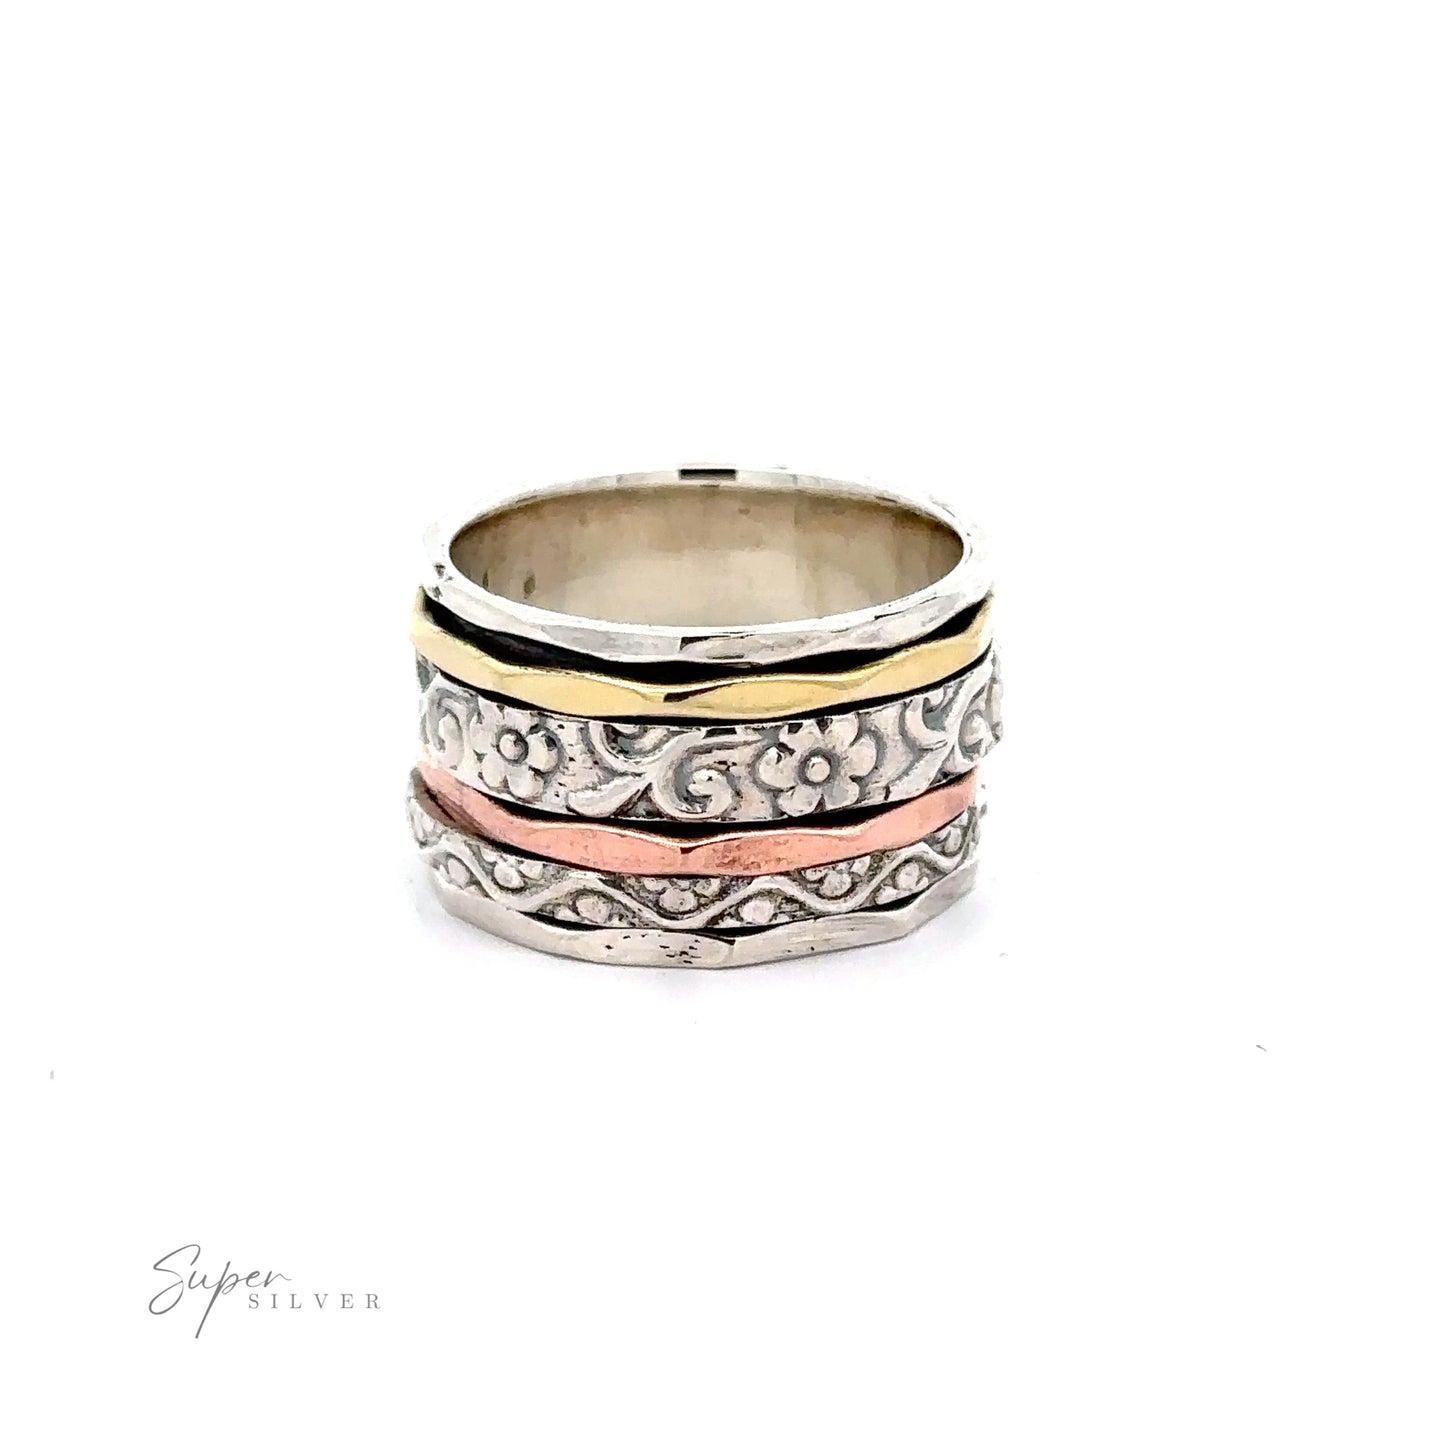 A Handmade Spinner Band with Flower Etching with an etched floral pattern on silver and gold bands.